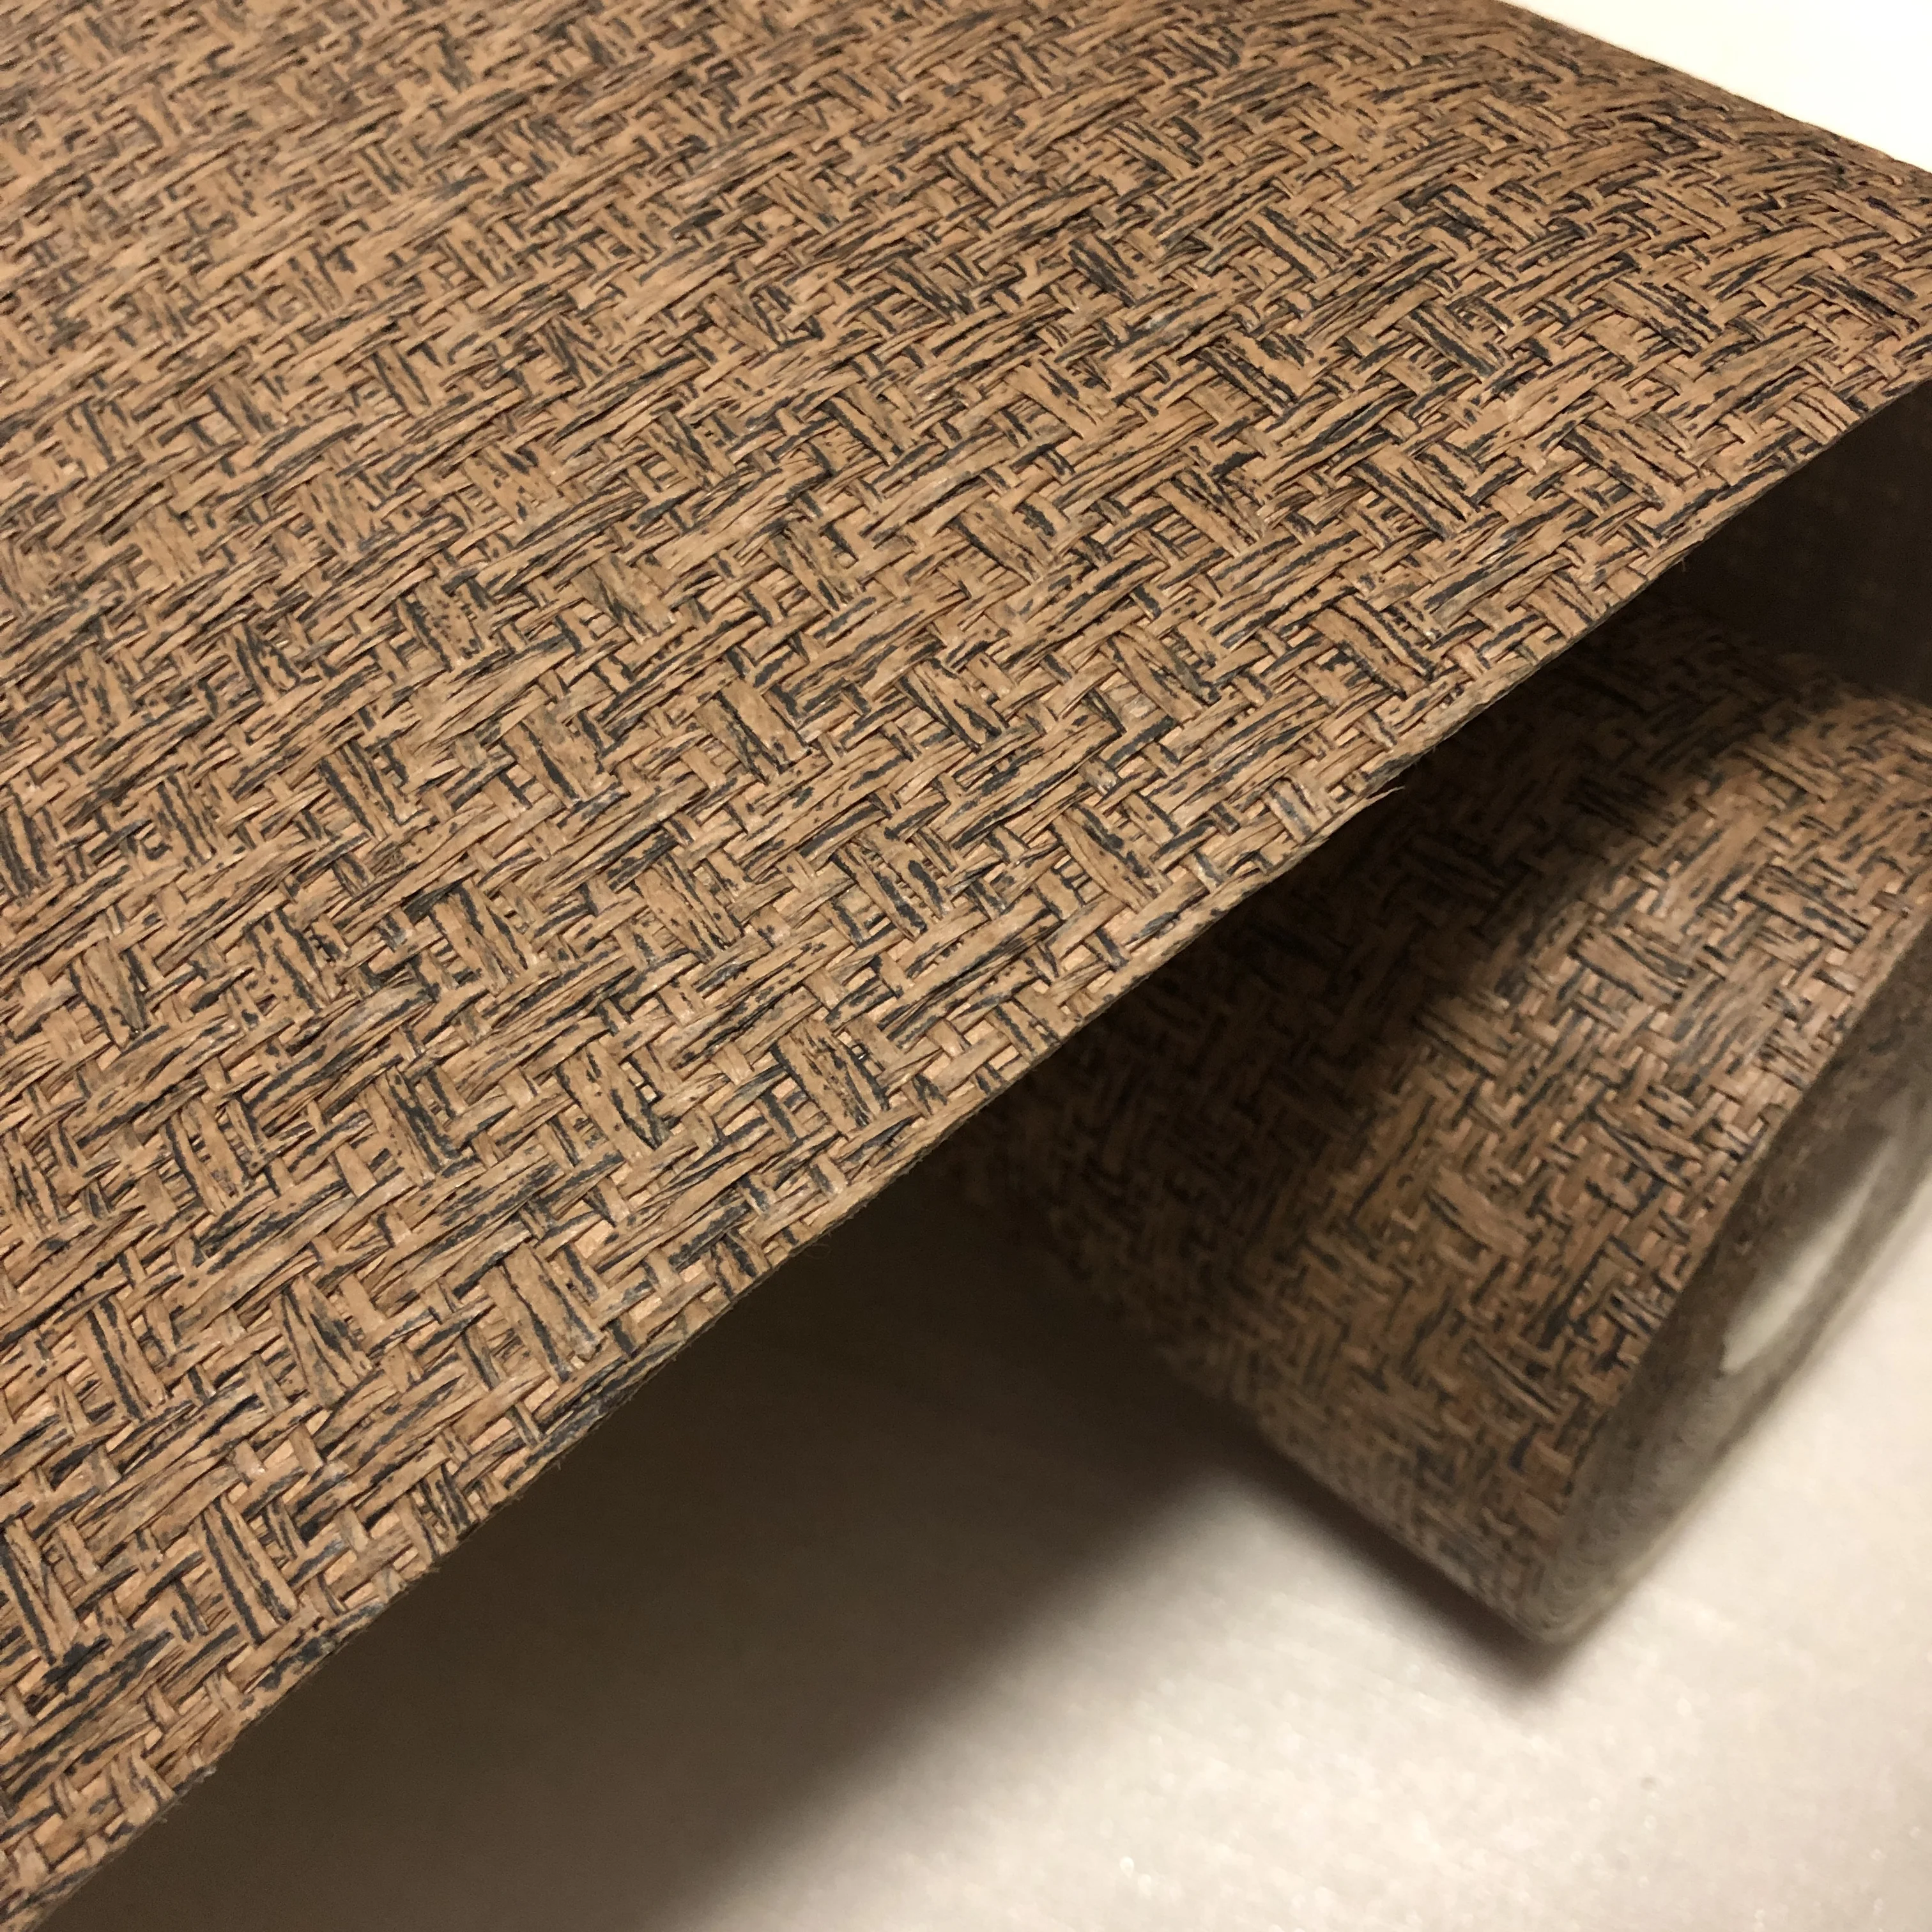 Natural Material Clay Bronze Color Paper Weave Wallpaper - Buy Paper Weave  Wallpaper,Clay Bronze Color Wallpaper,Natural Material Wallpaper Product on  